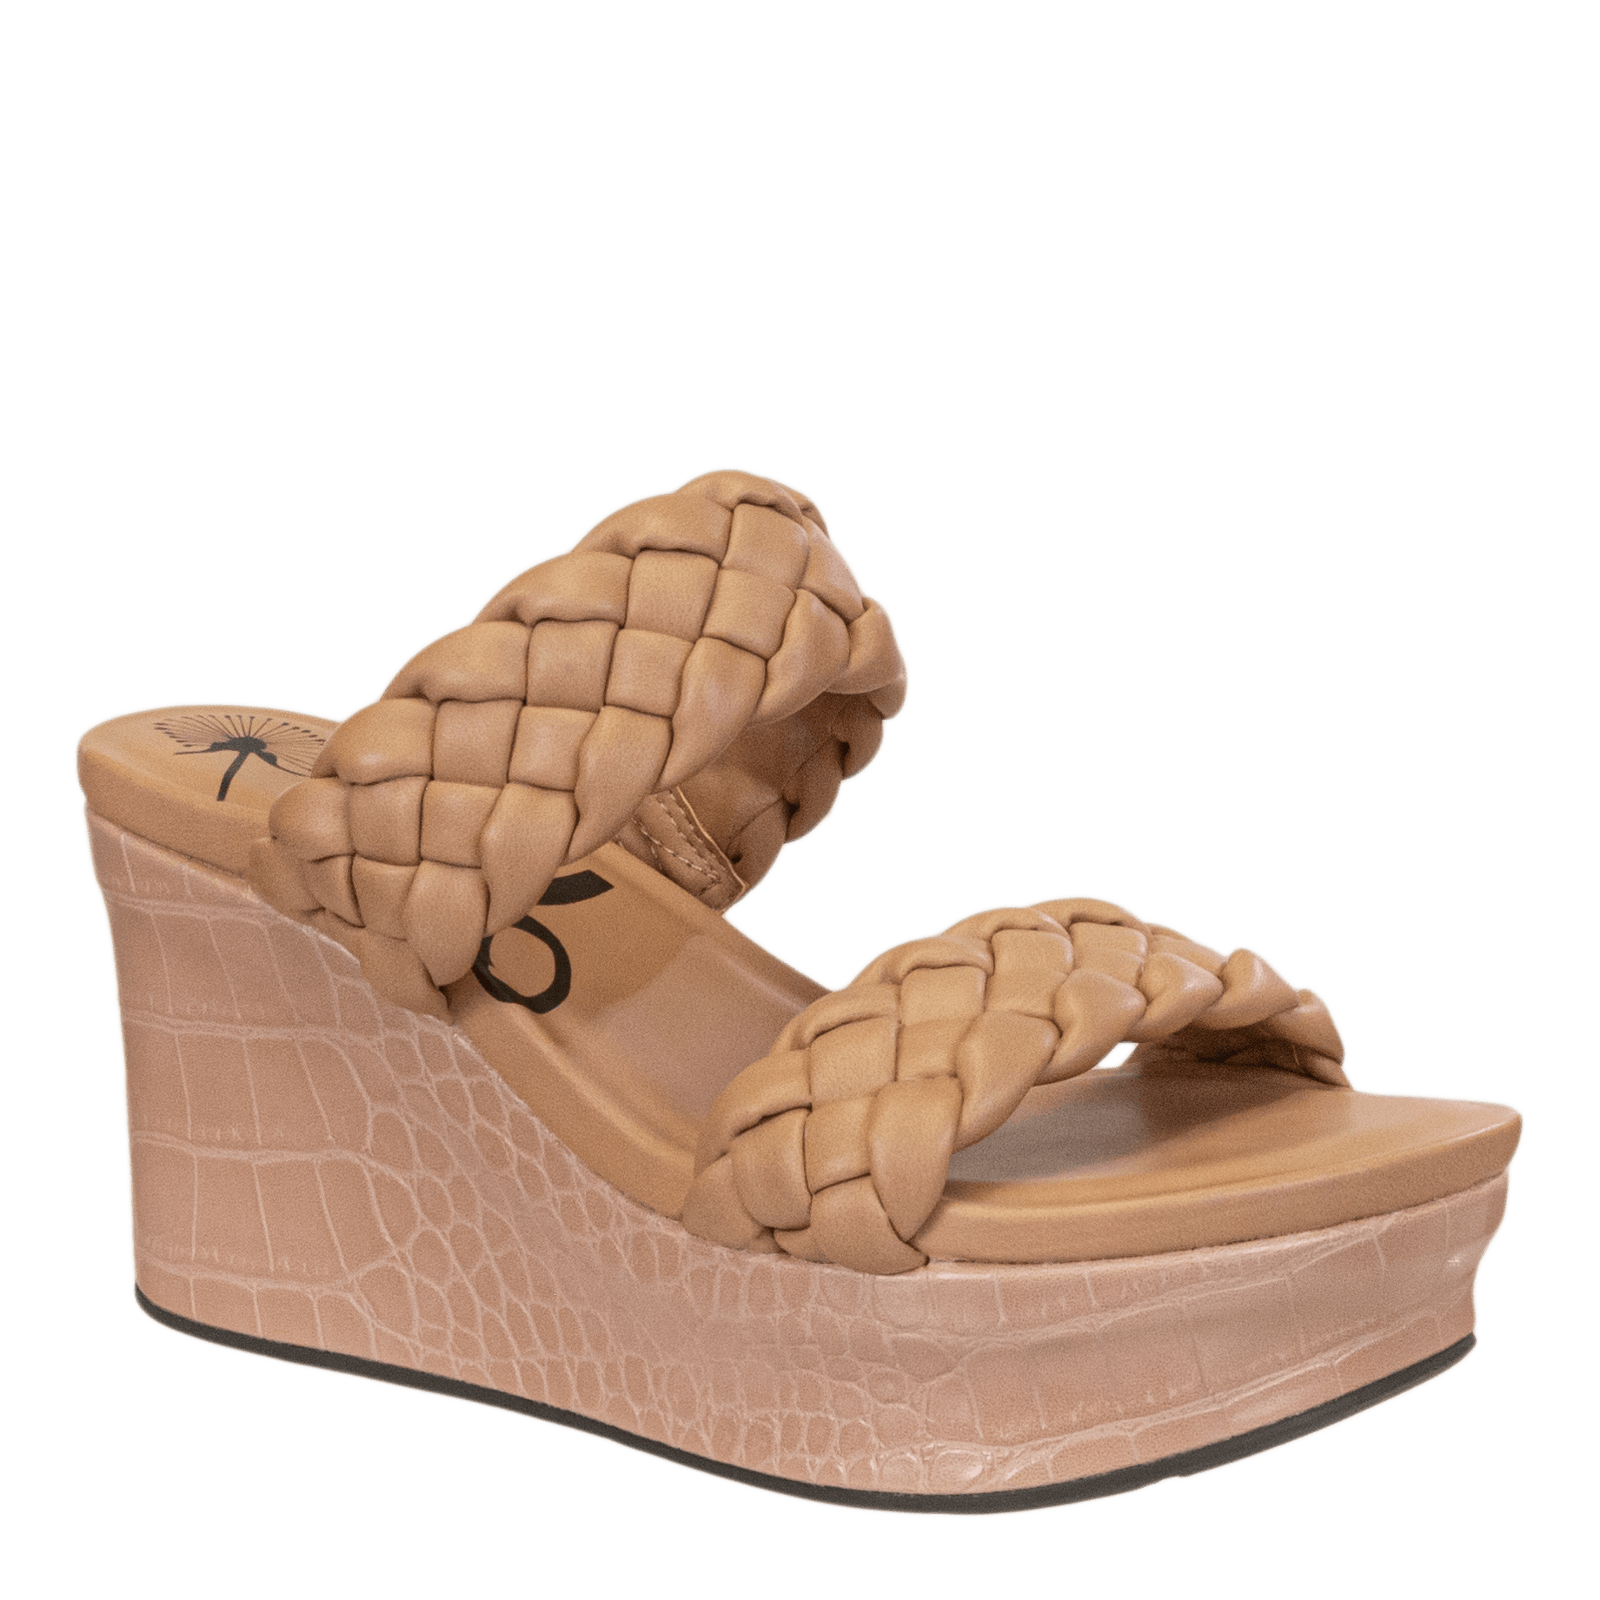 EHQJNJ Female Women's Sandals Comfortable Bohemian Style and Comfortable  Shoes with Medium Length Heel Outdoor Shoes Wedge Sandals Women Comfortable